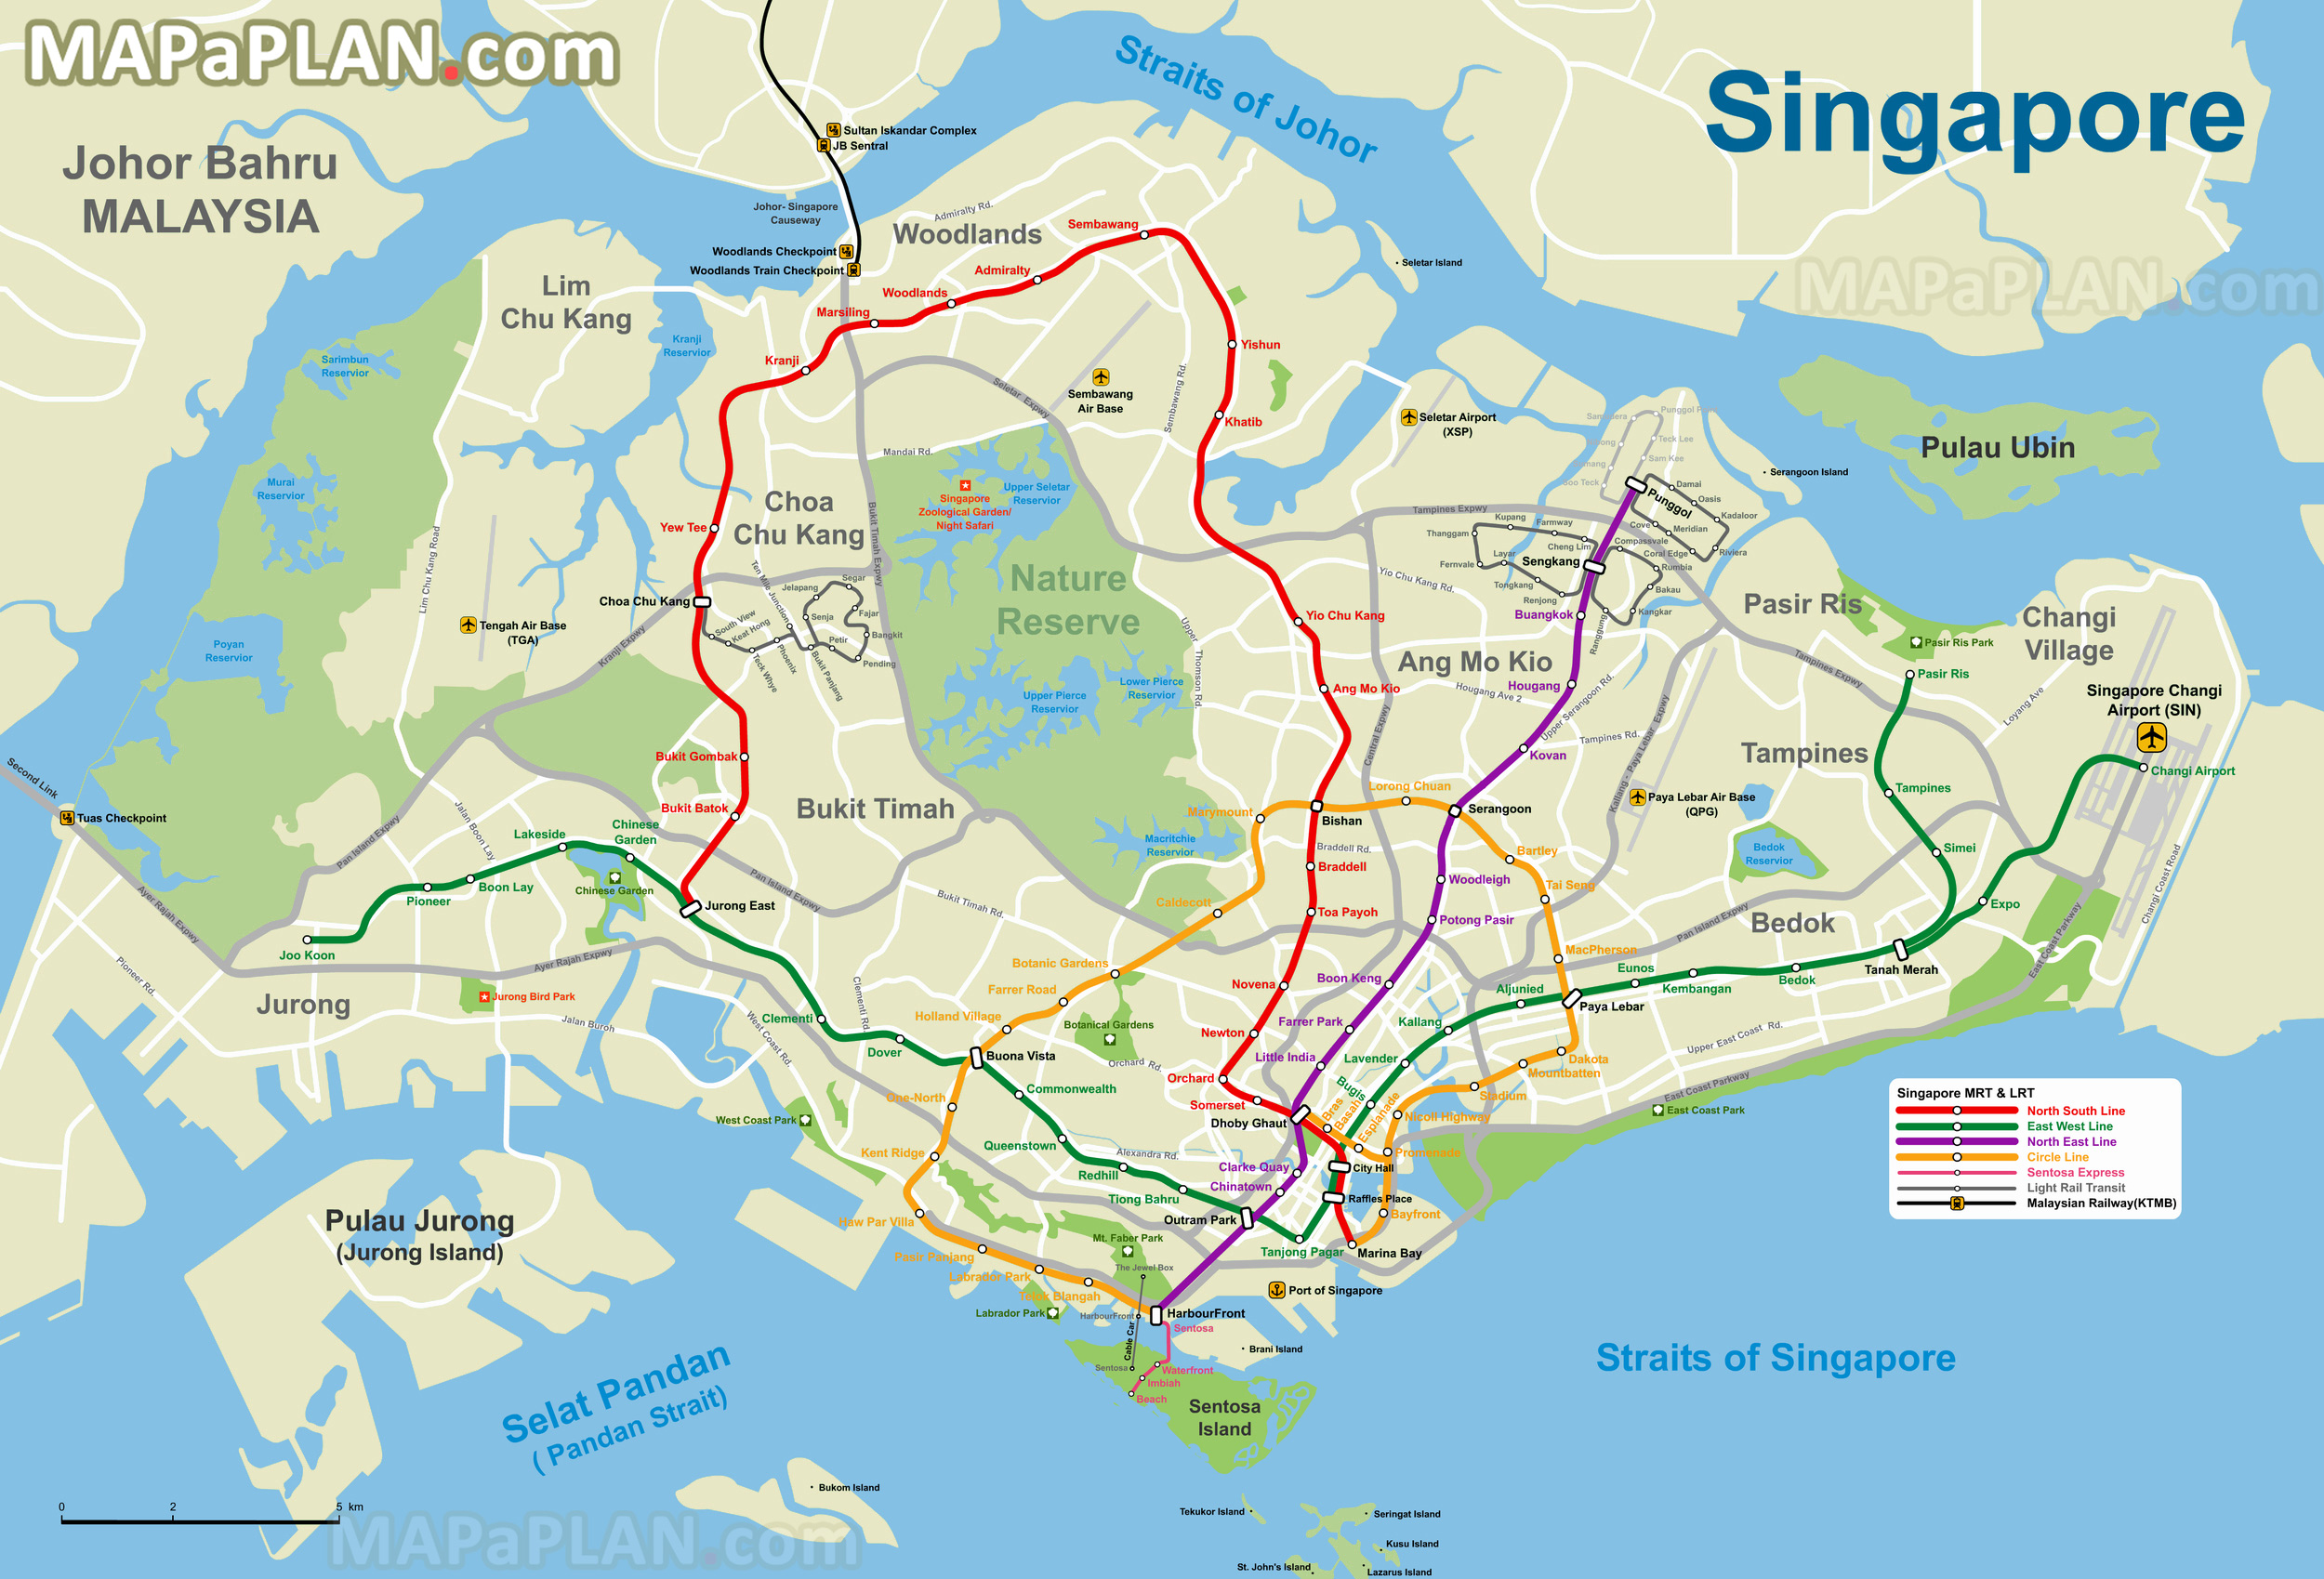 Metro Subway Underground Tube public transport train lines network geographic guide Singapore top tourist attractions map